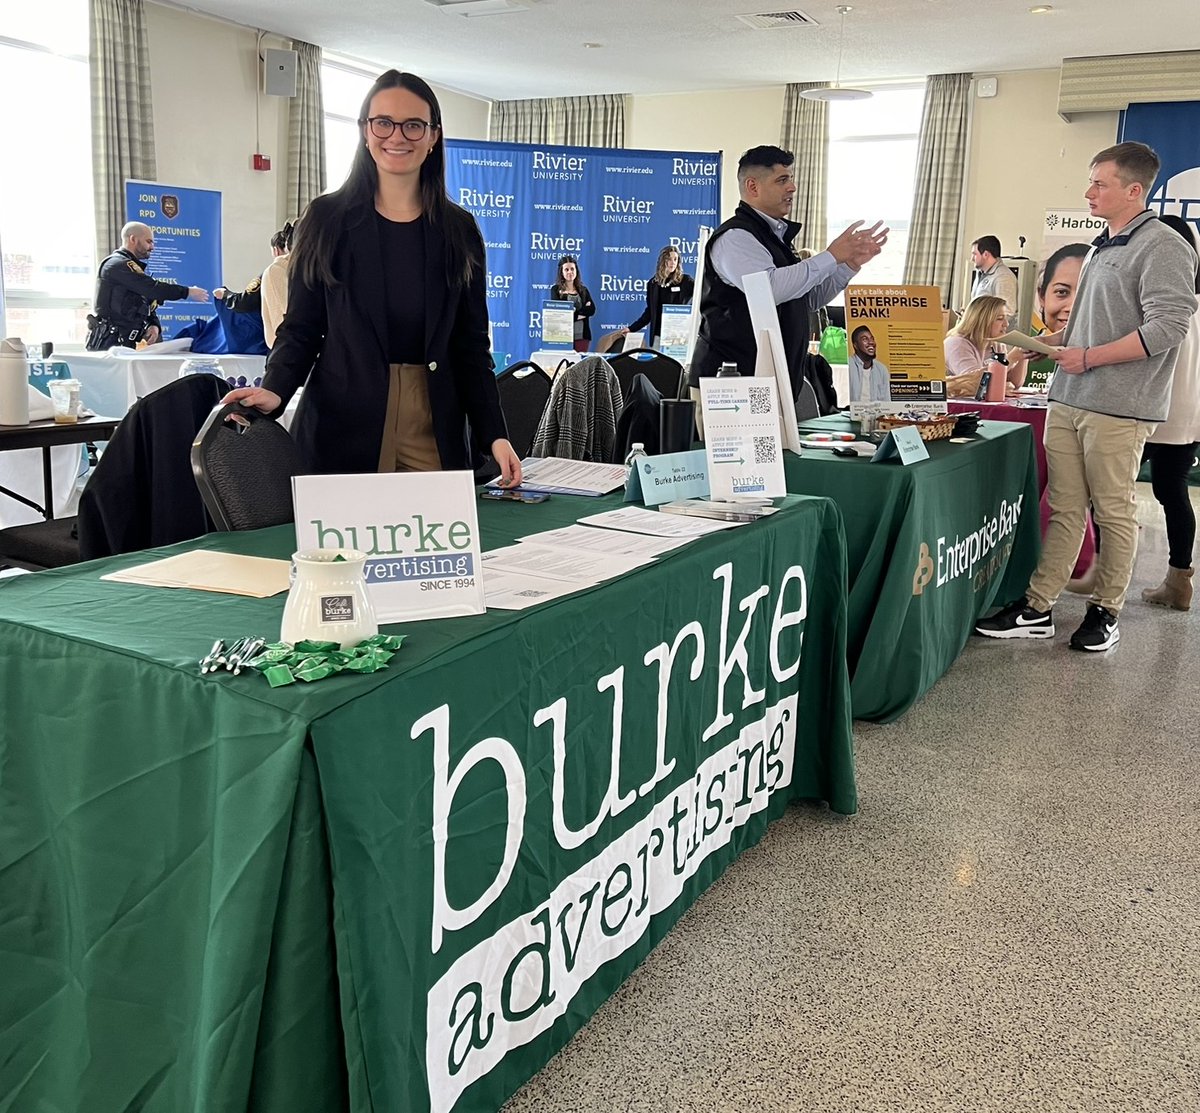 We are excited to be at Rivier University - Business, Arts & Sciences Career Fair 2024 today! We connected with talented students and discussed future career opportunities at Burke Advertising. #CareerFair #RivierUniversity #marketingjobs #joinburke #burkeadvertising